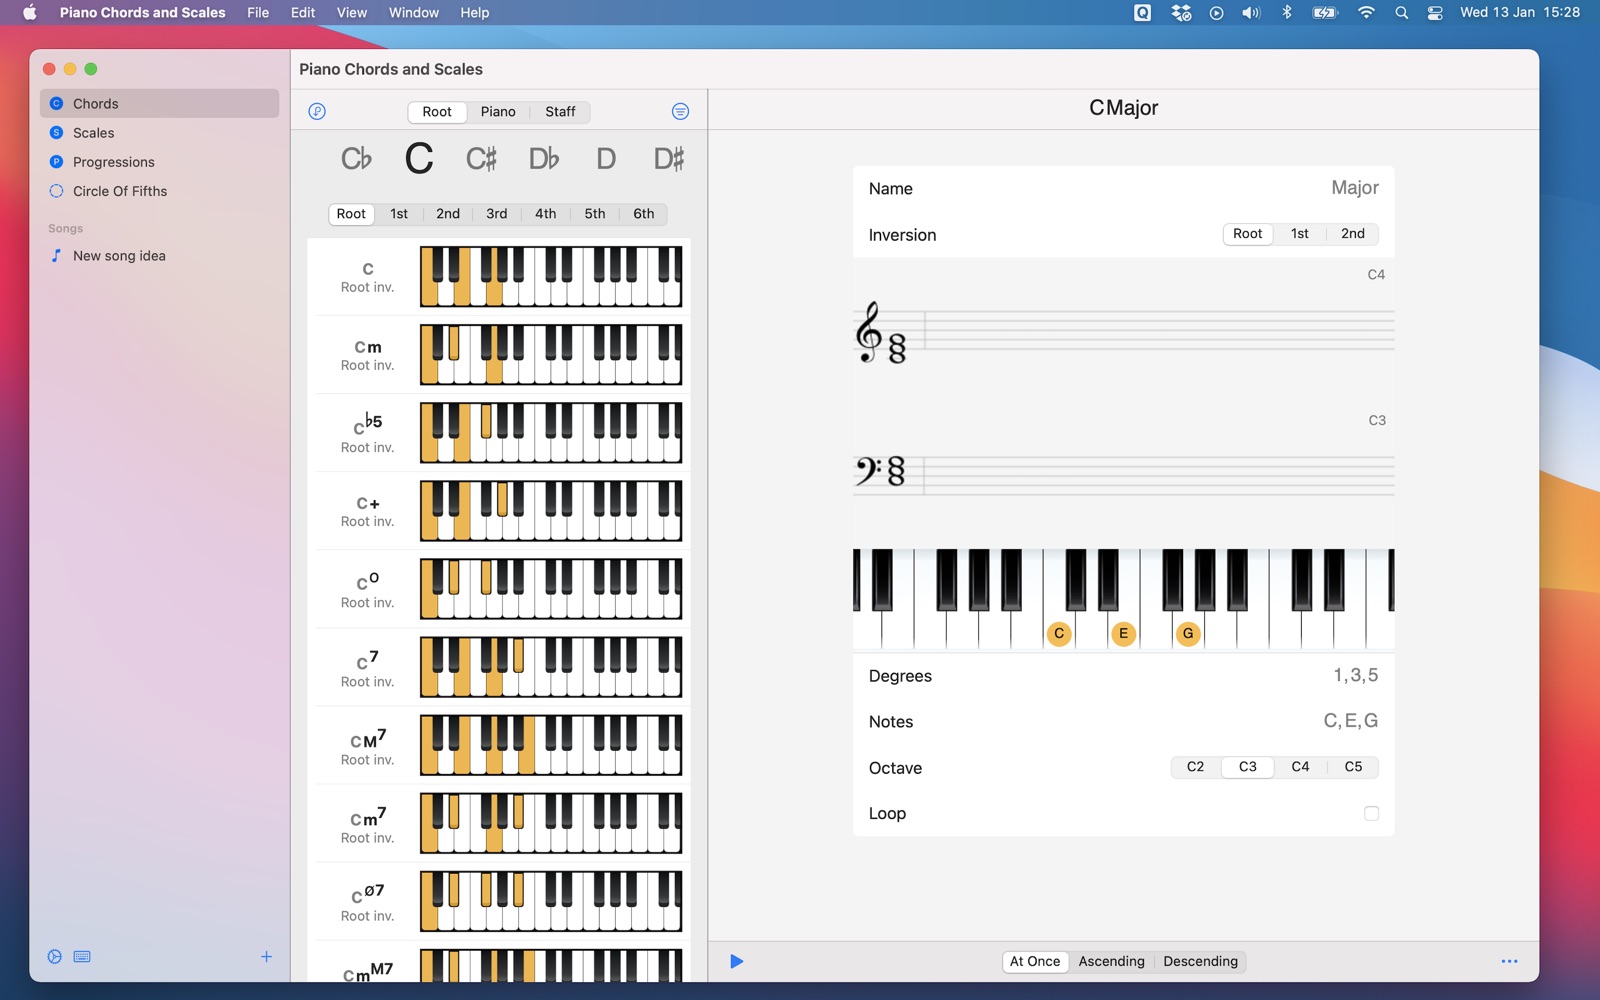 Piano Chords and Scales 6.1 : Main Window